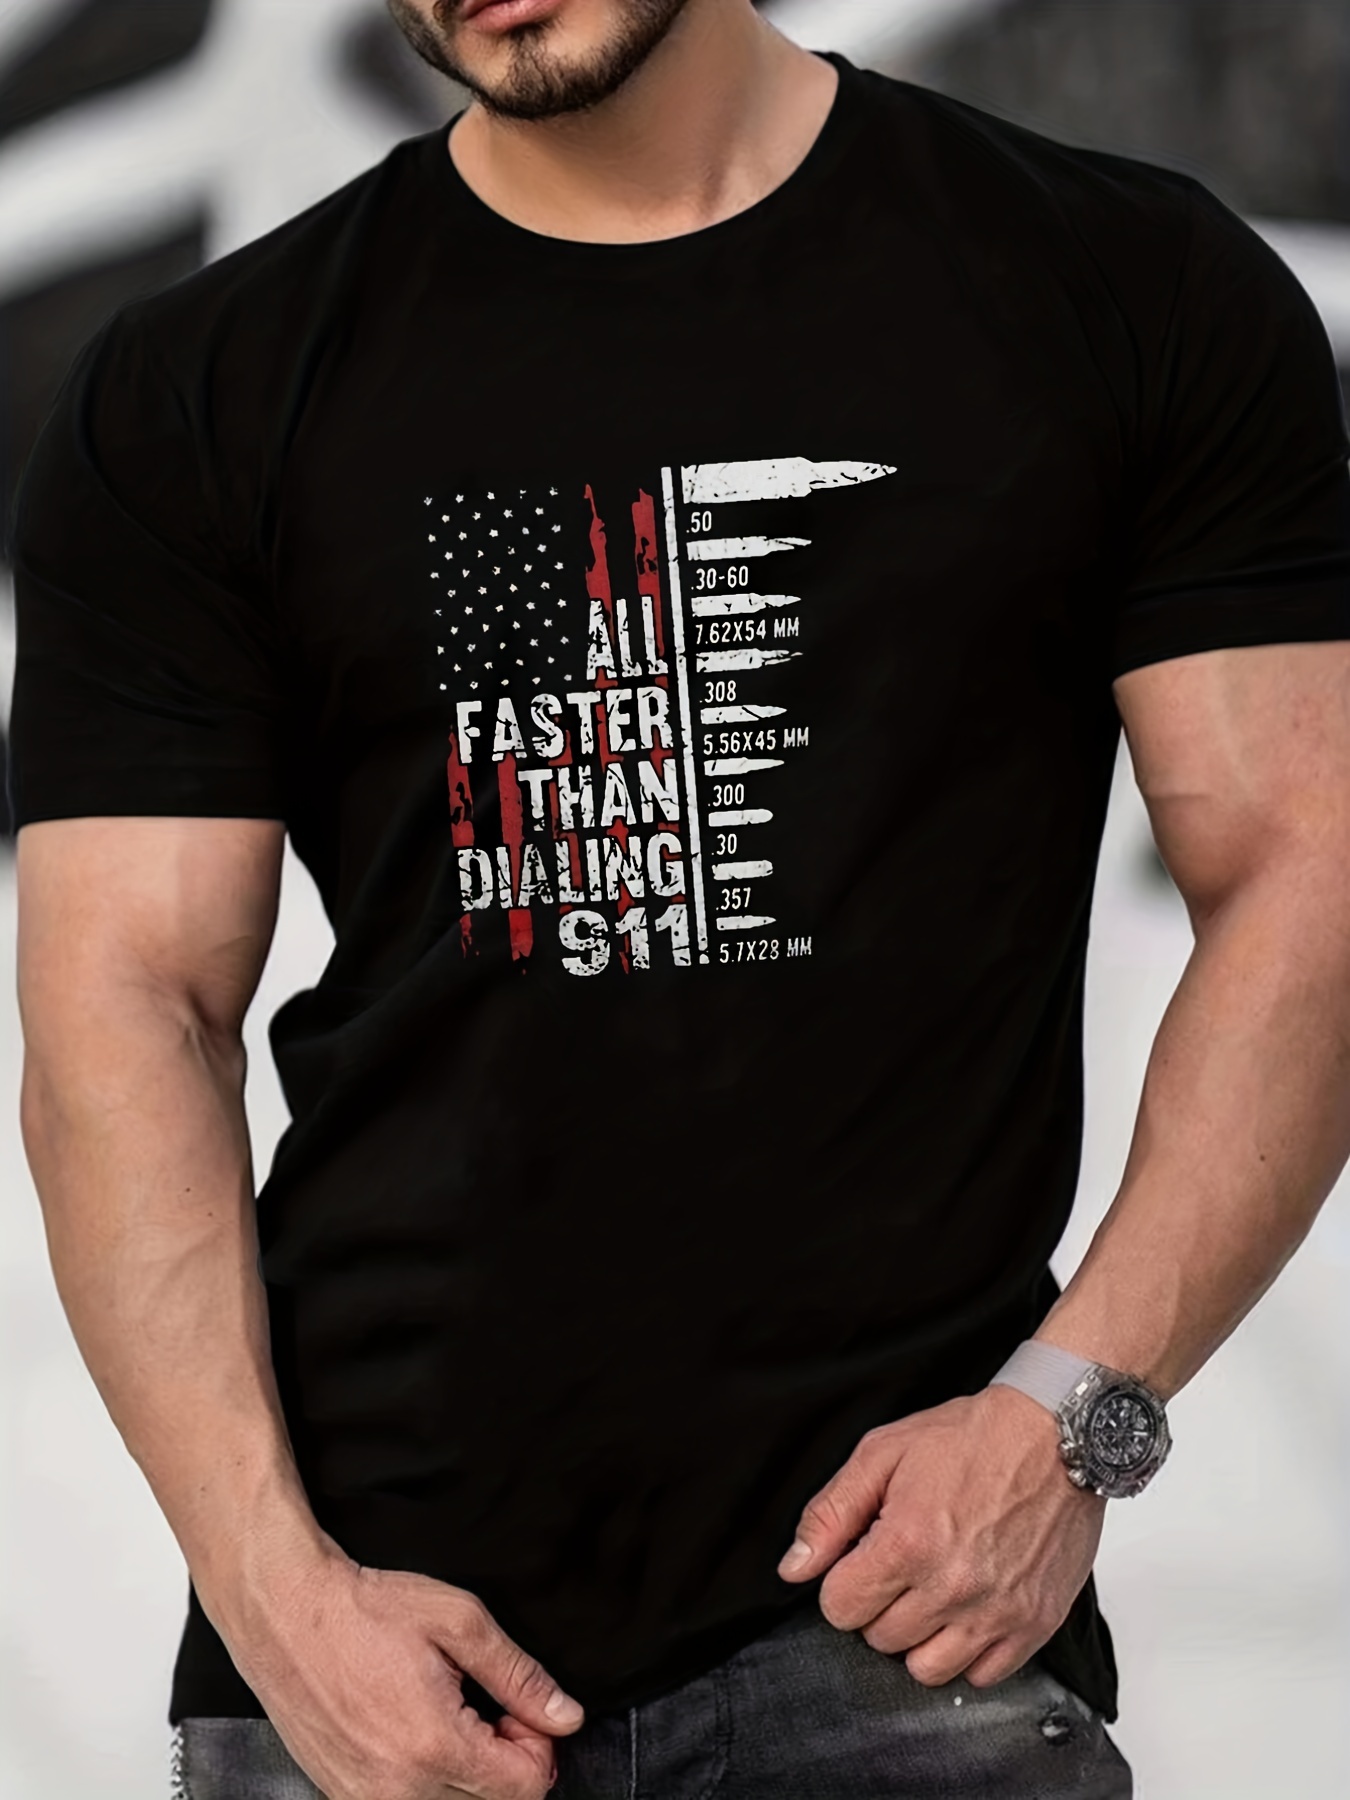 Skygge Ejeren Lil All Faster Than Dialing 911 Round Neck T Shirts Causal Graphic Tees Short  Sleeves Slim Fit Tops Mens Summer Clothing | Quick & Secure Online Checkout  | Temu